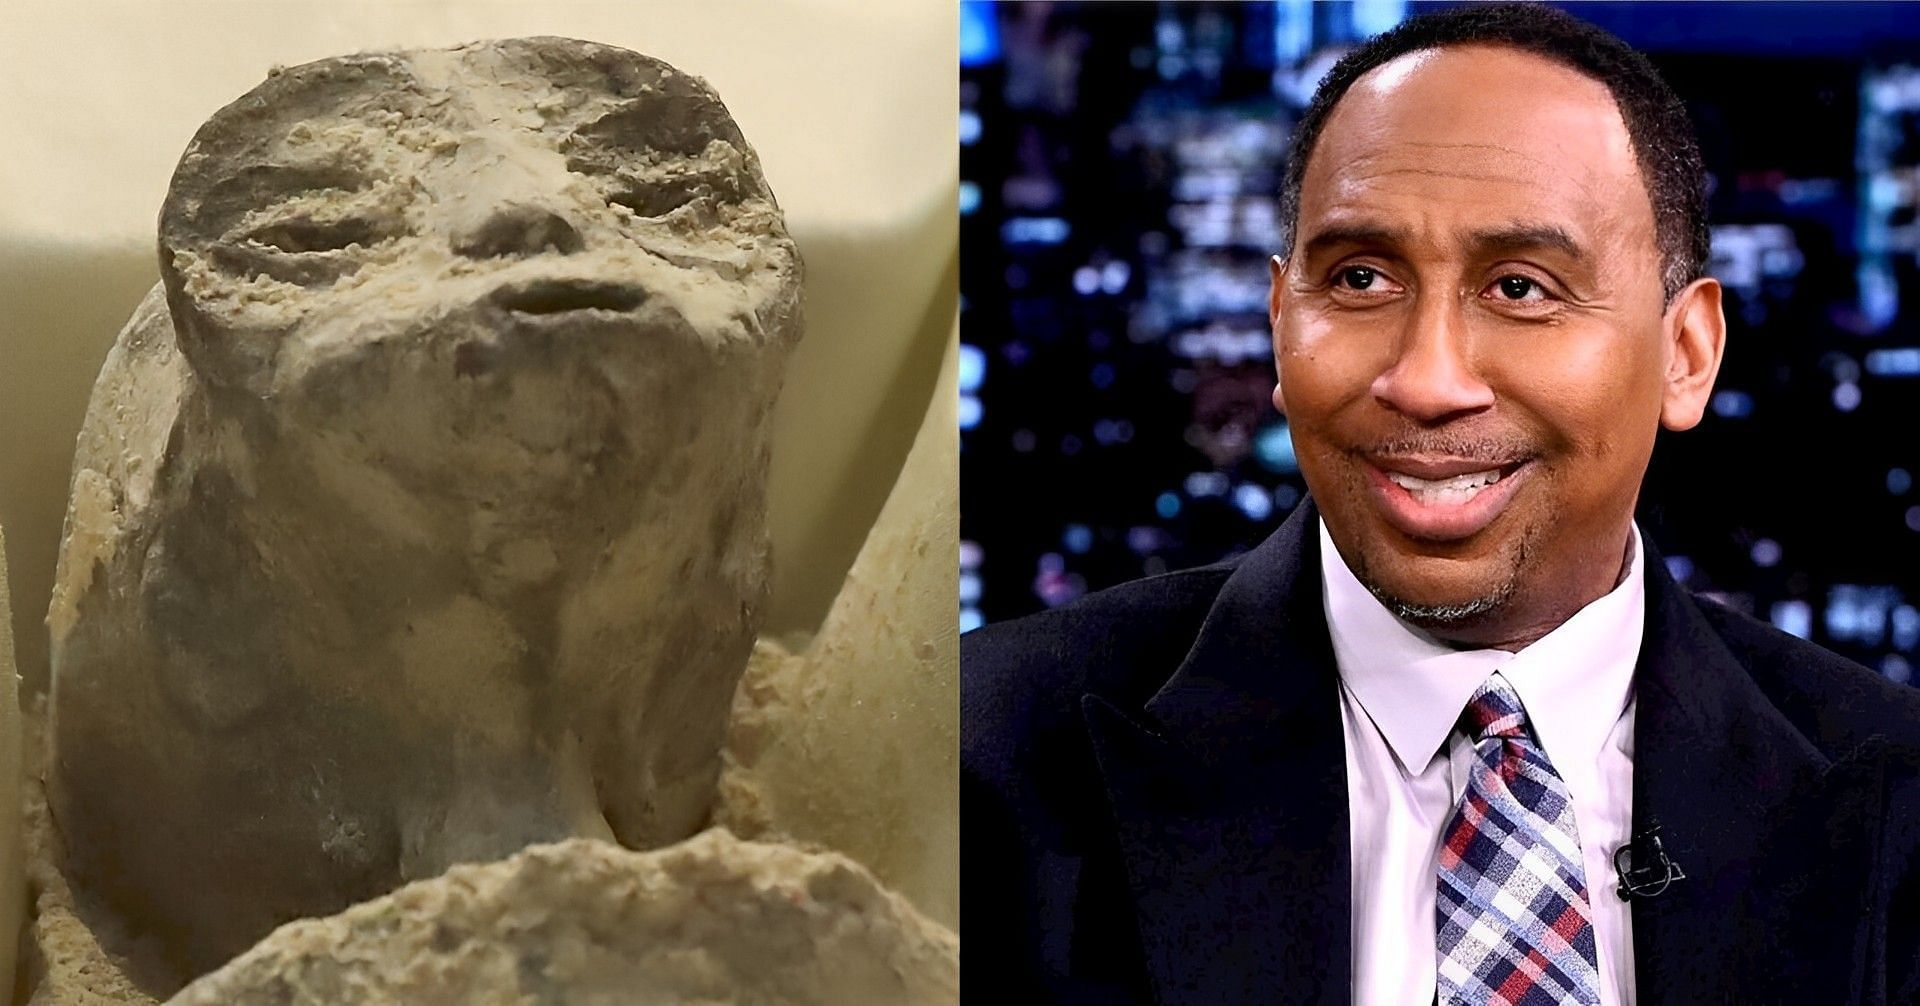 Alleged alien remains that were recently presented to the Mexican government and ESPN analyst Stephen A. Smith